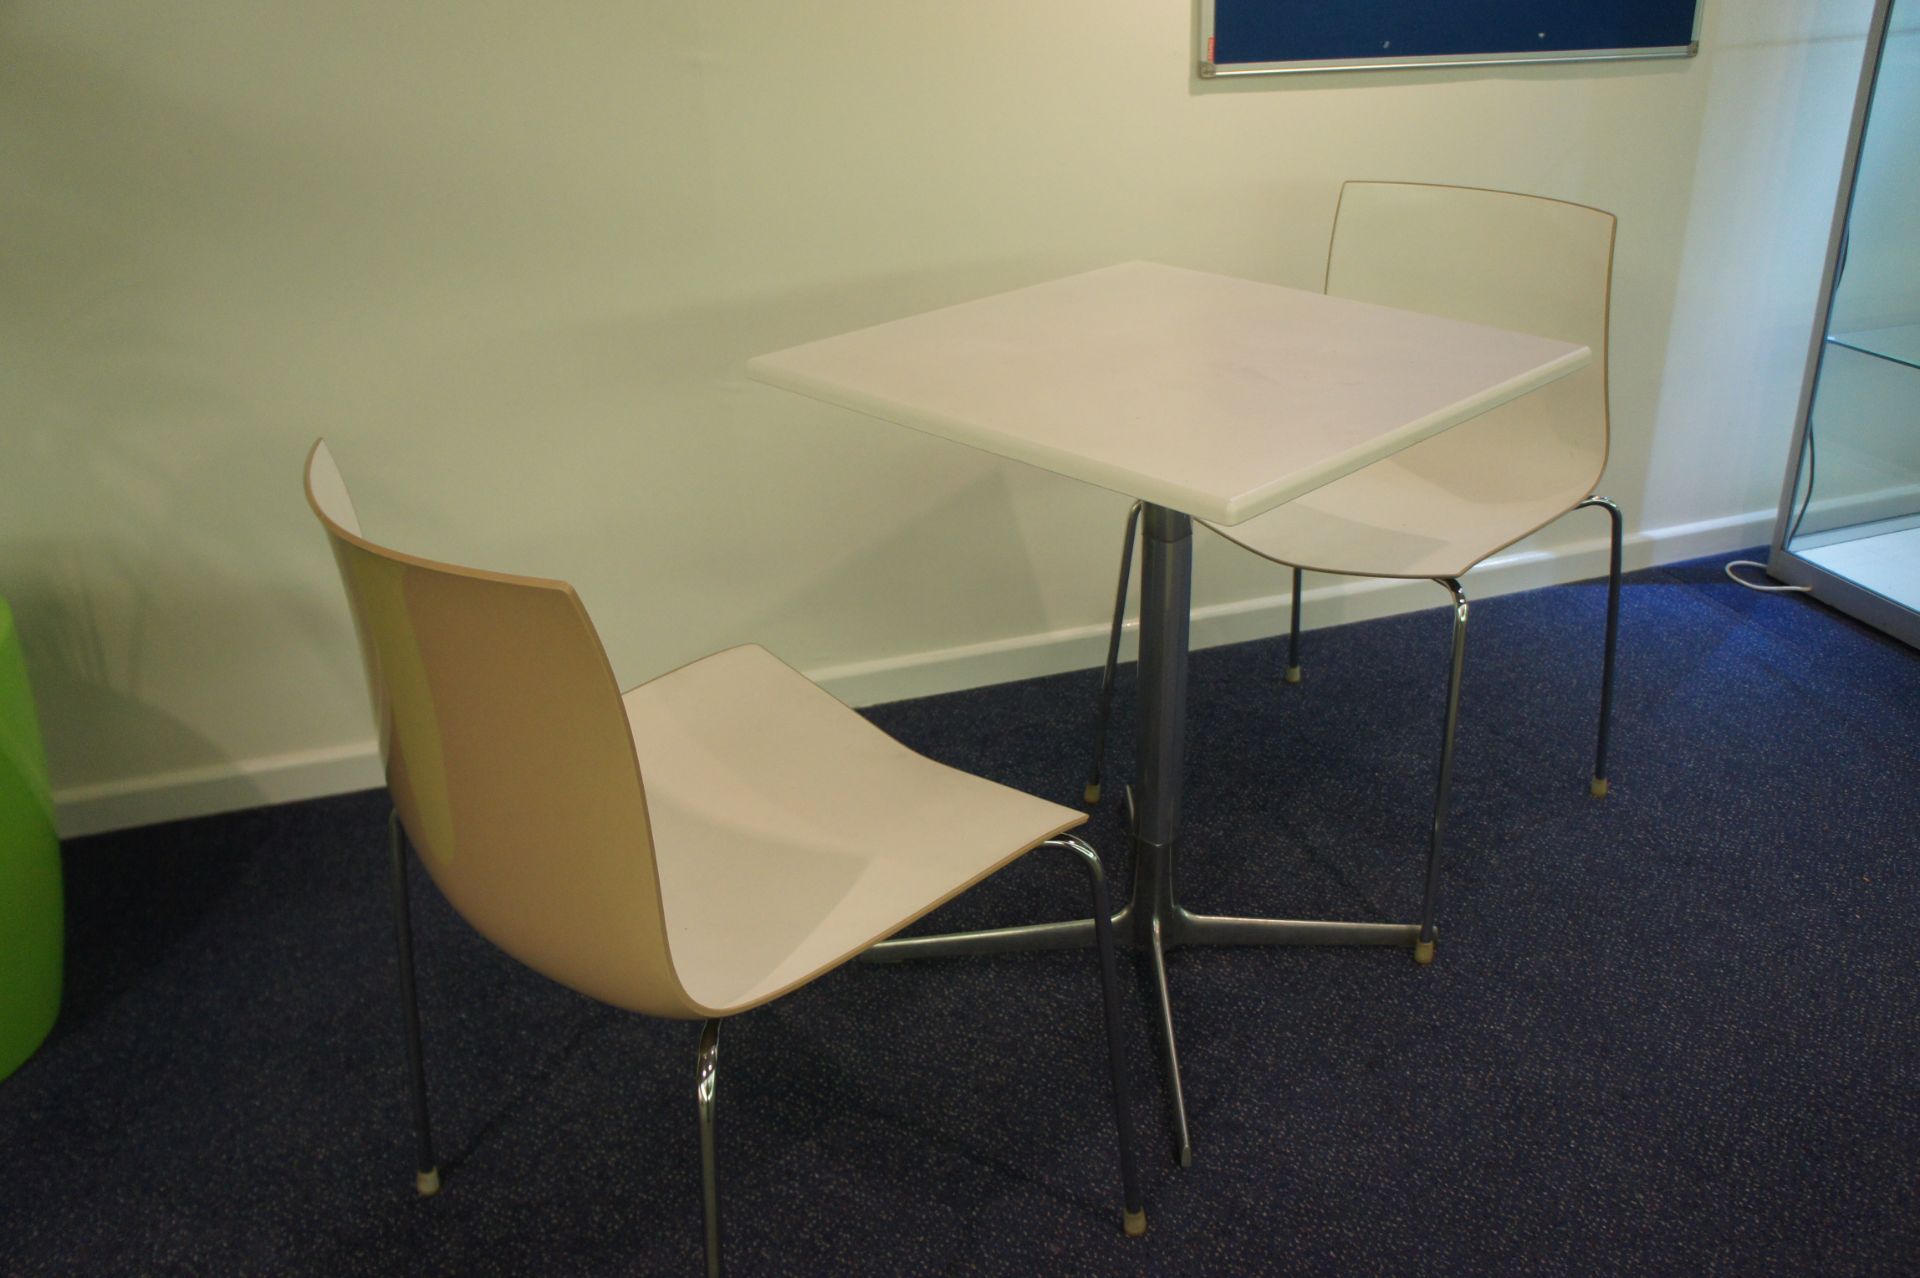 4 x bistro tables with 2 x chairs, 600mm x 600mm